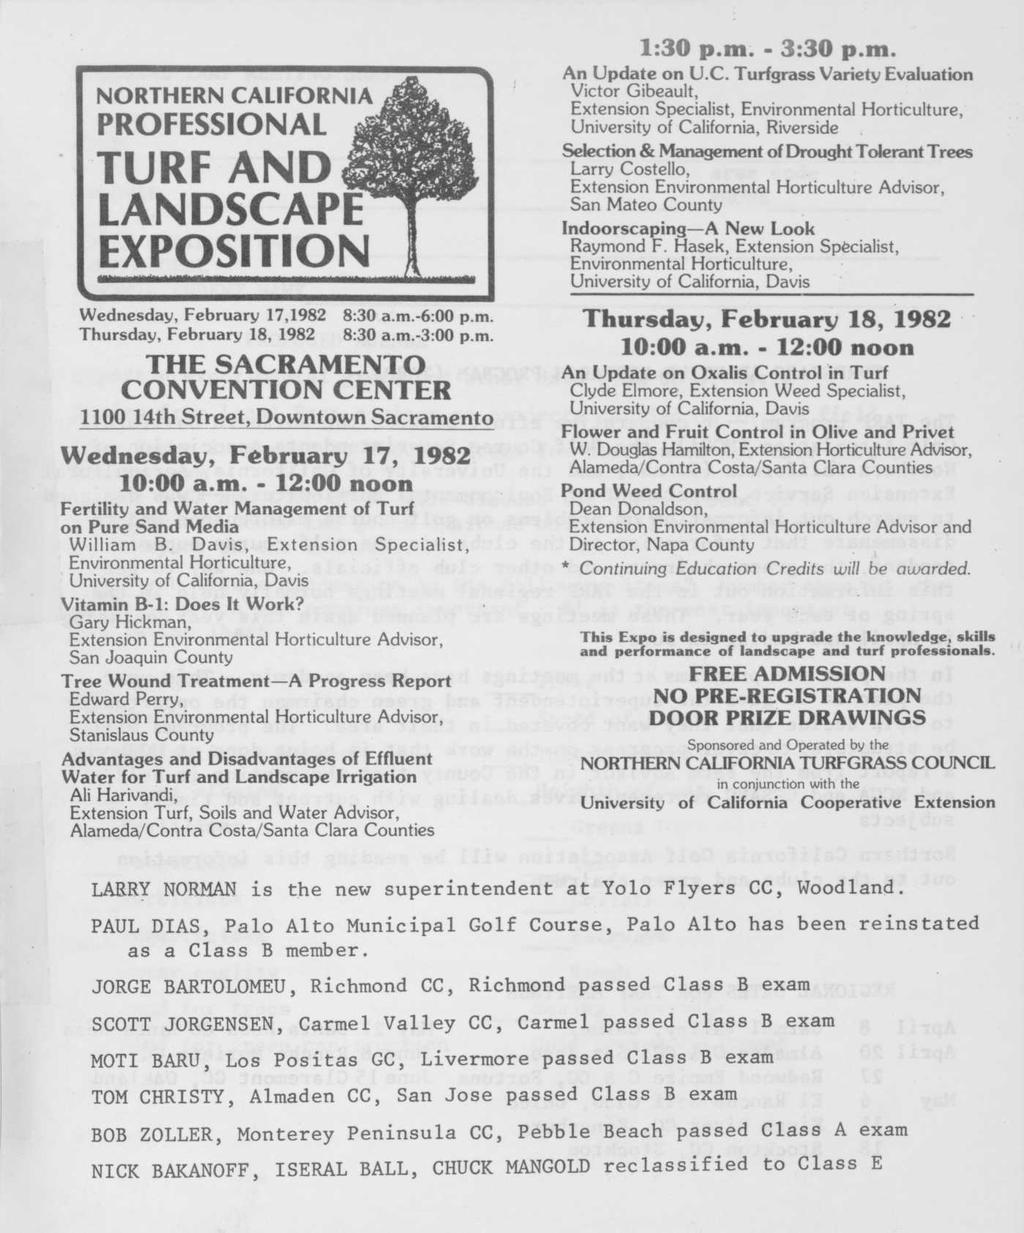 NORTHERN CALIFORNIA PROFESSIONAL TURF AND LANDSCAPE EXPOSITION Wednesday, February 17,1982 Thursday, February 18, 1982 8:30 a.m.